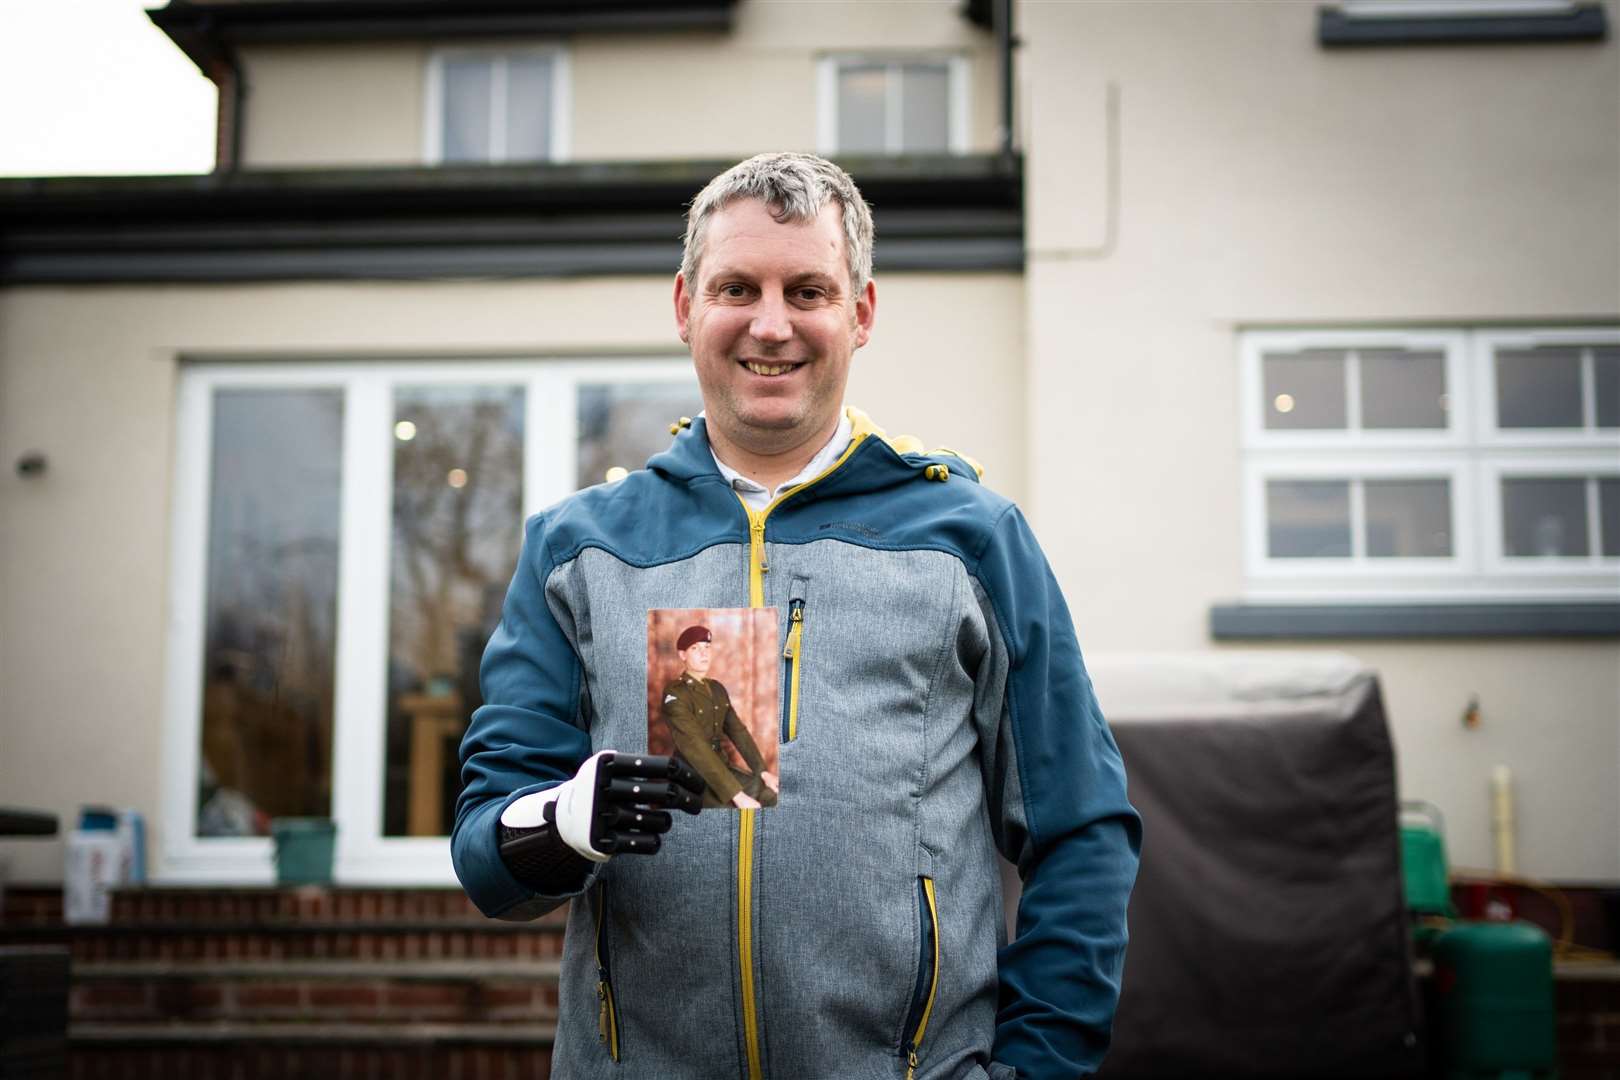 Darren Fuller's bionic 'Hero Arm' holds a photo of himself from his days in the army. Picture: SWNS